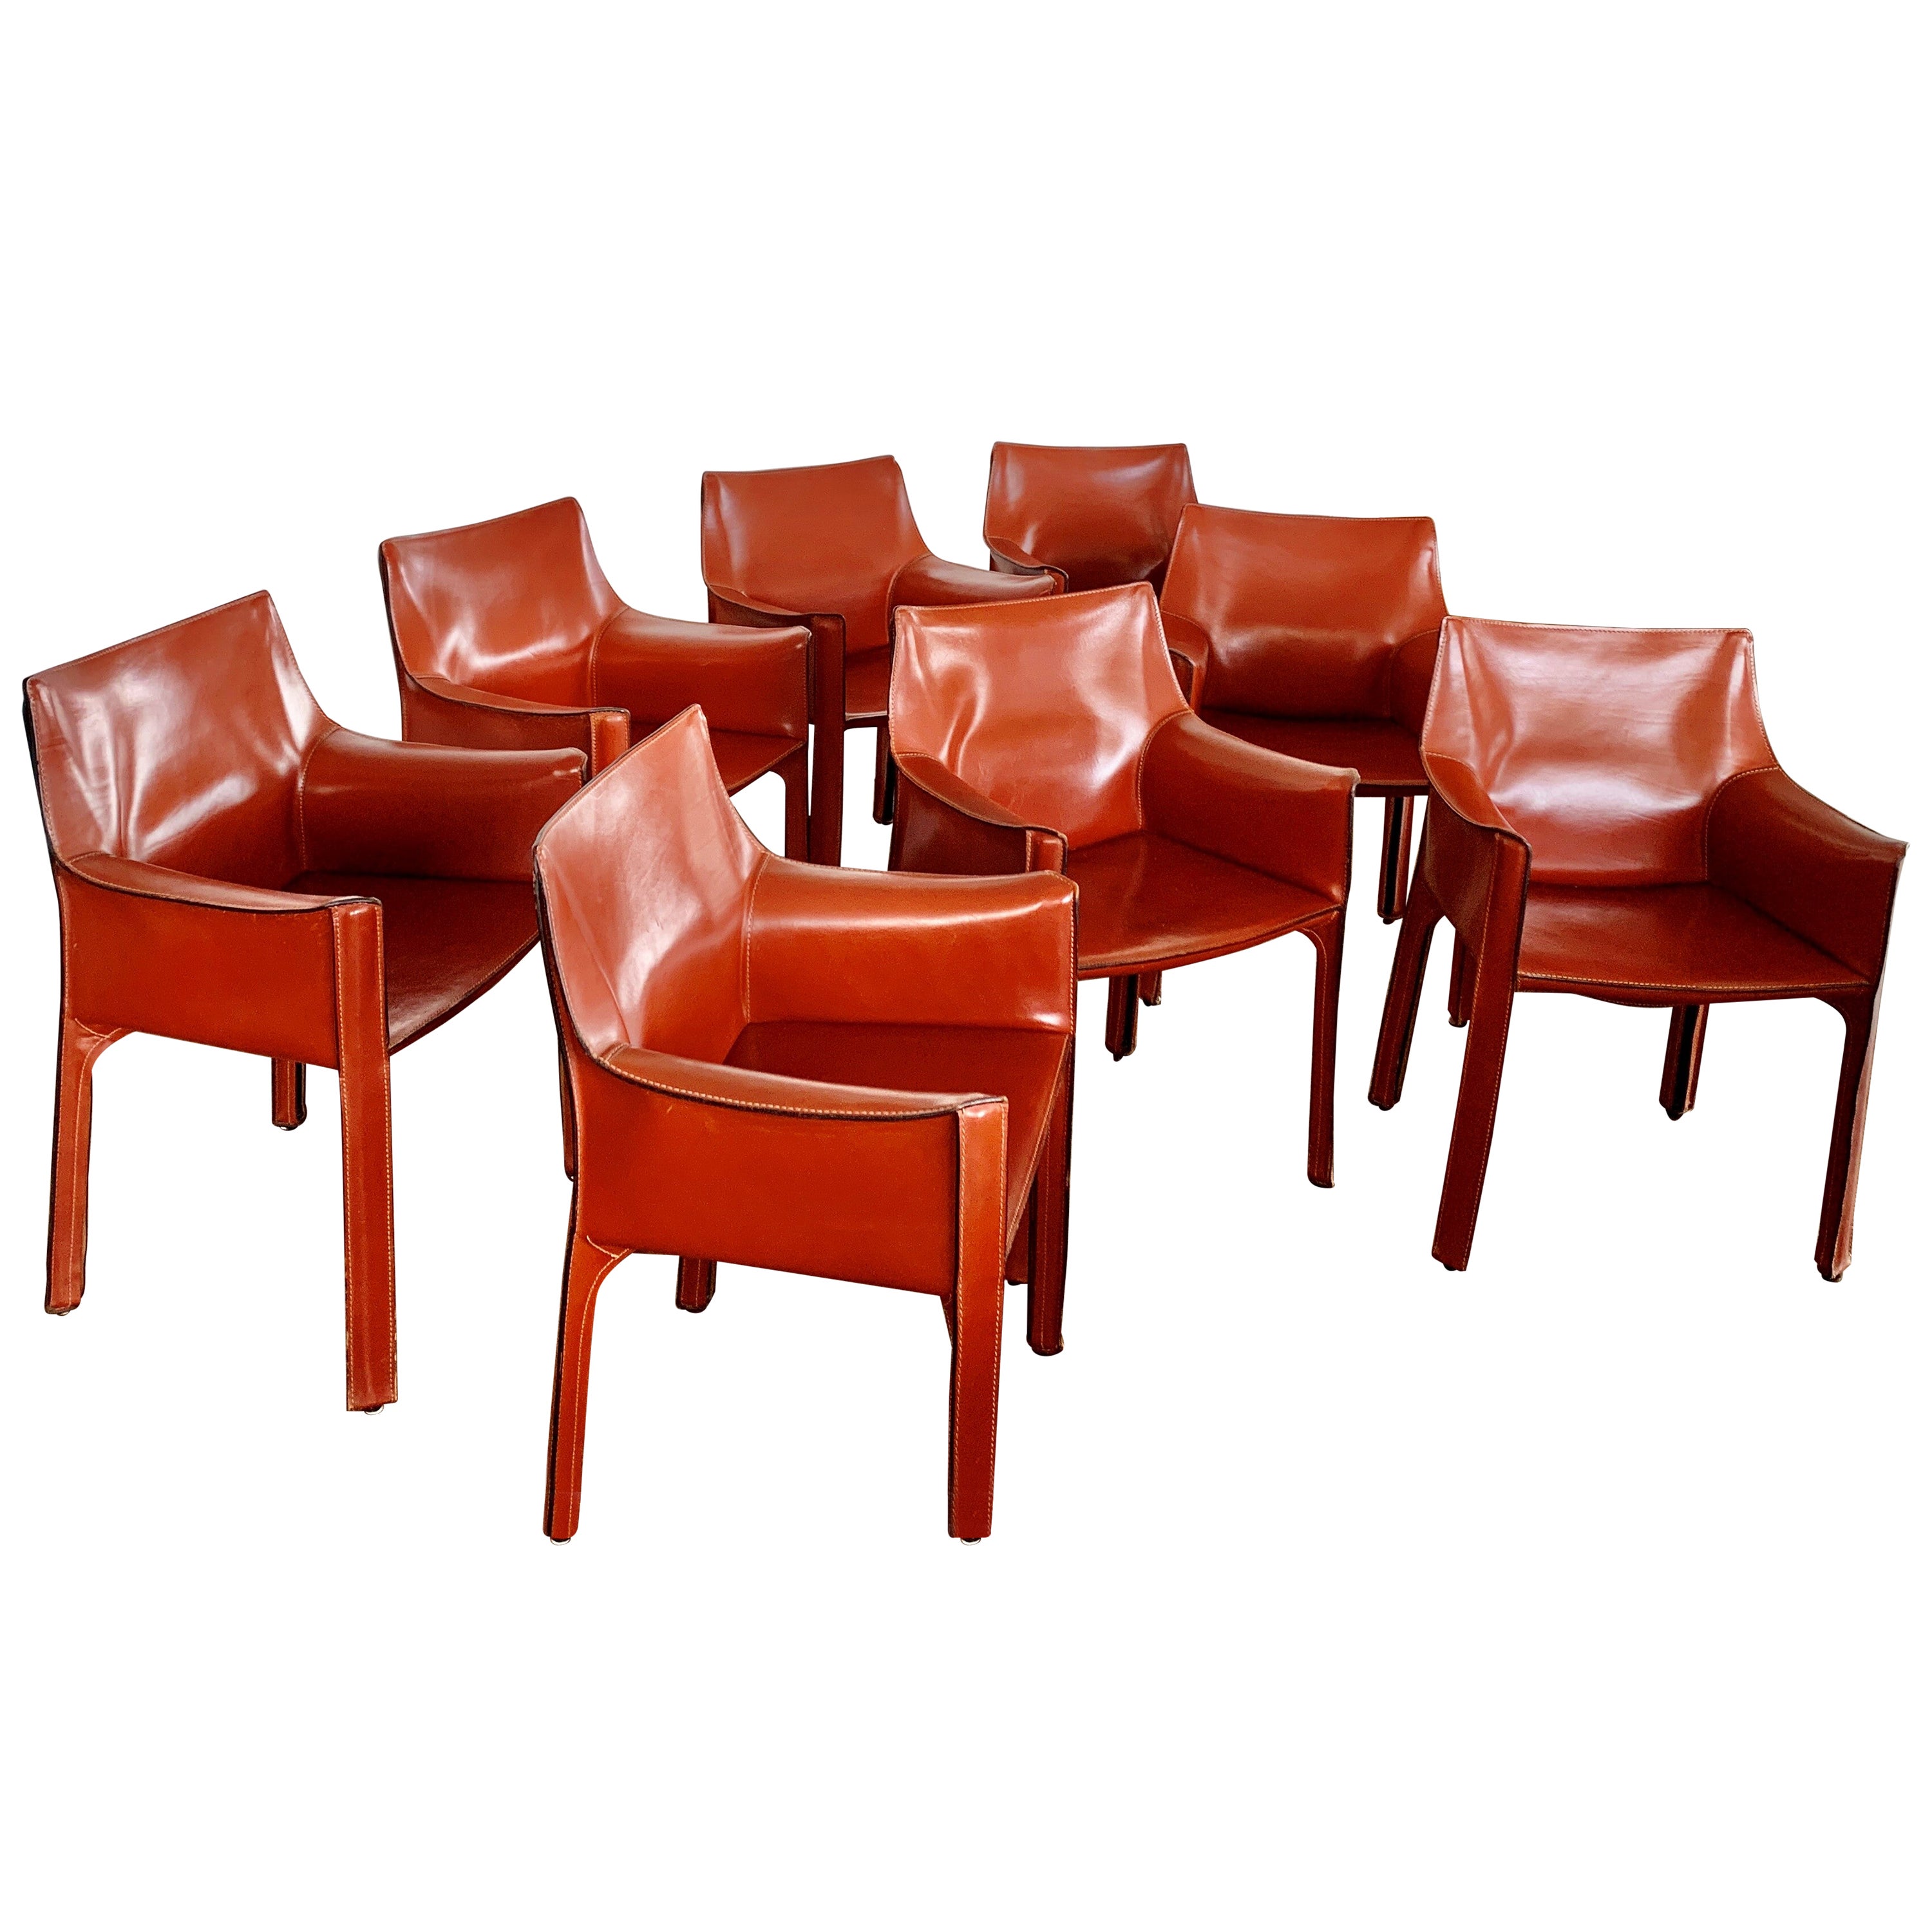 8 Mario Bellini CAB 413 Armchairs in Russian Red 'Cognac' Leather for Cassina